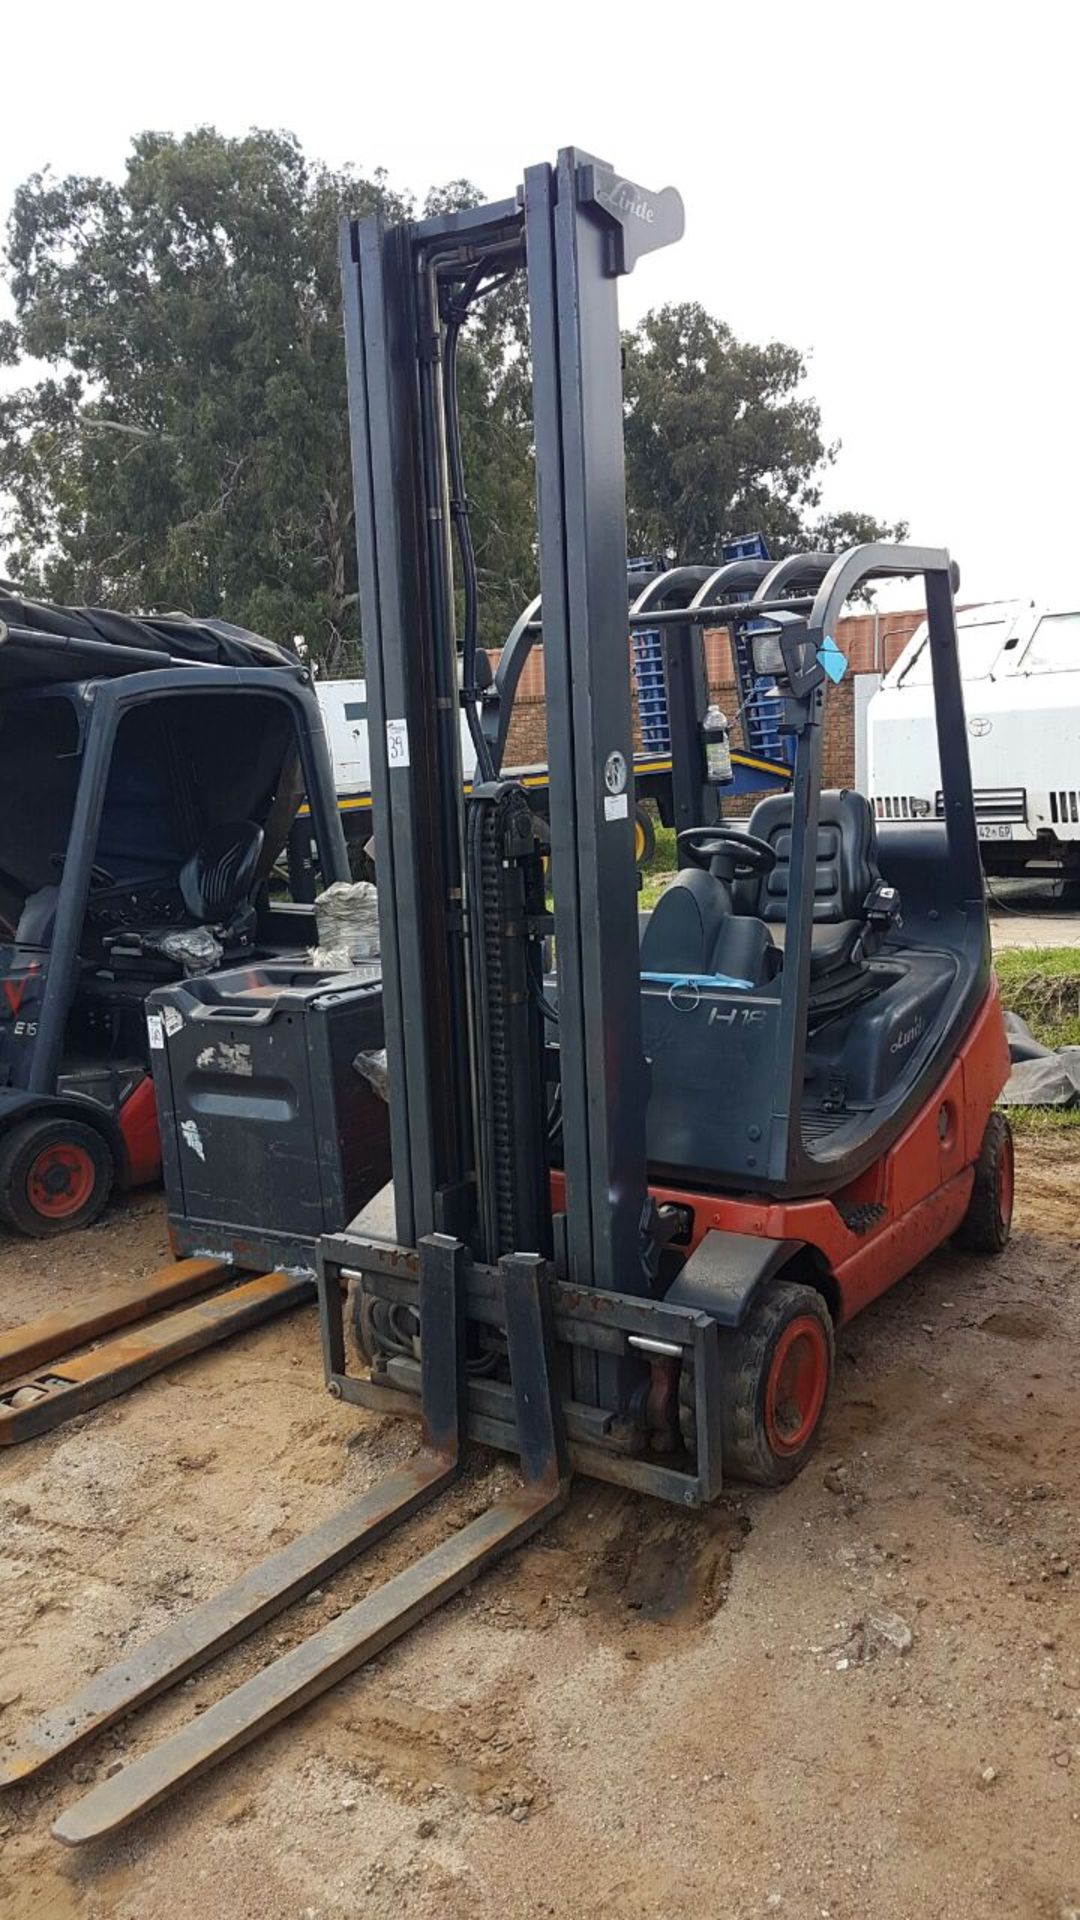 2009 LINDE H18D 1.8 TON DIESEL FORKLIFT (15,381 HOURS - HOURS NOT GUARANTEED BY AUCTIONEER) - (JHB) - Image 3 of 3